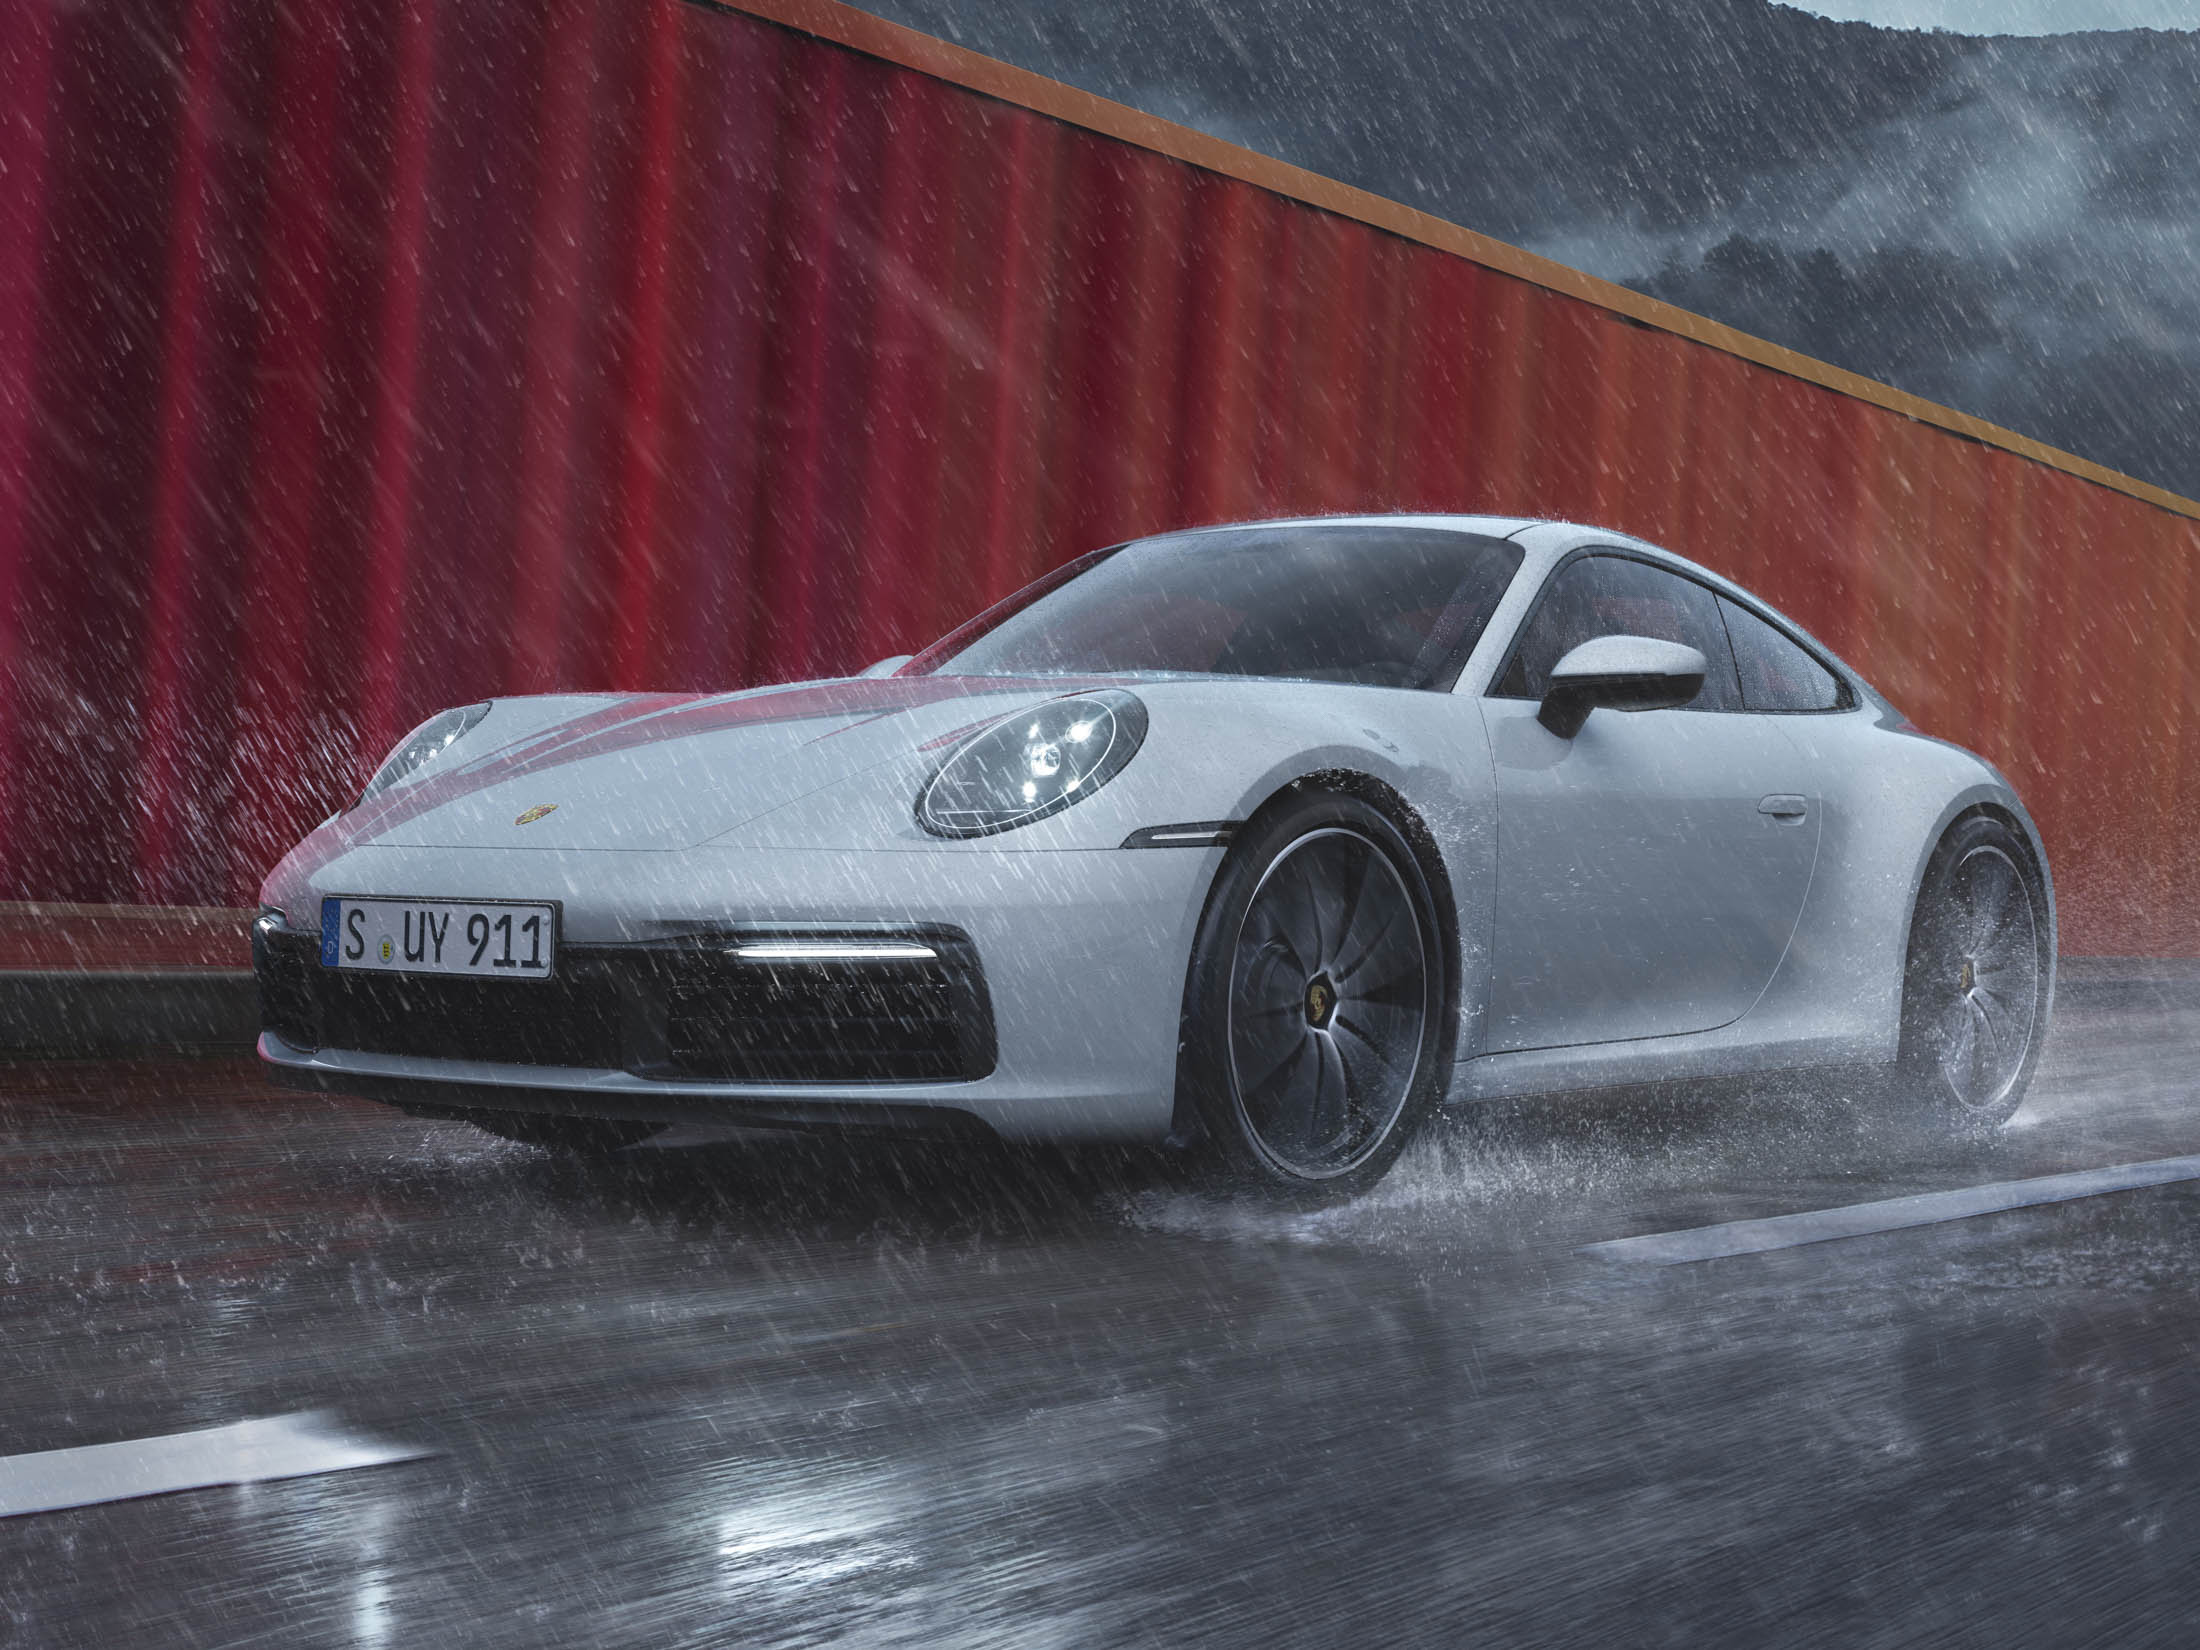 relates to The Porsche 911 Is the Most Profitable Car of 2019